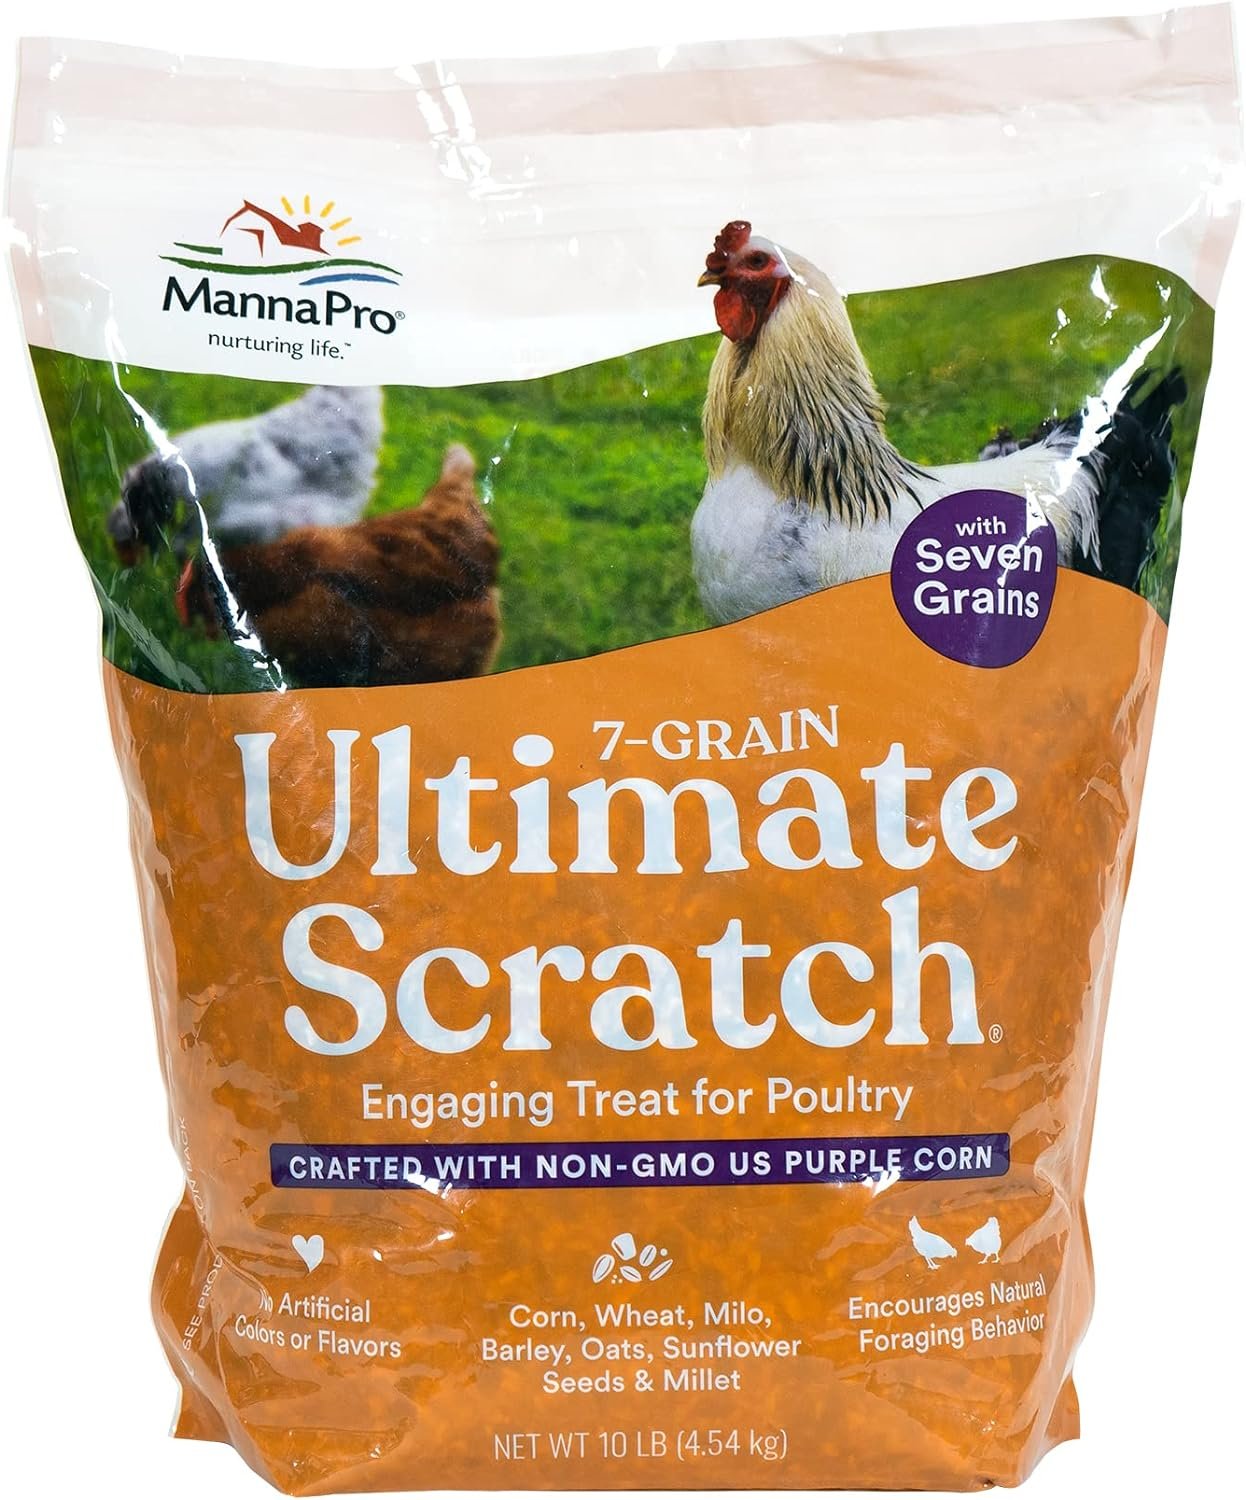 Manna Pro 7-Grain Ultimate Chicken Scratch - Scratch Grain Treat for Chickens and Other Birds - Non-GMO Natural Ingredients - 10 lbs